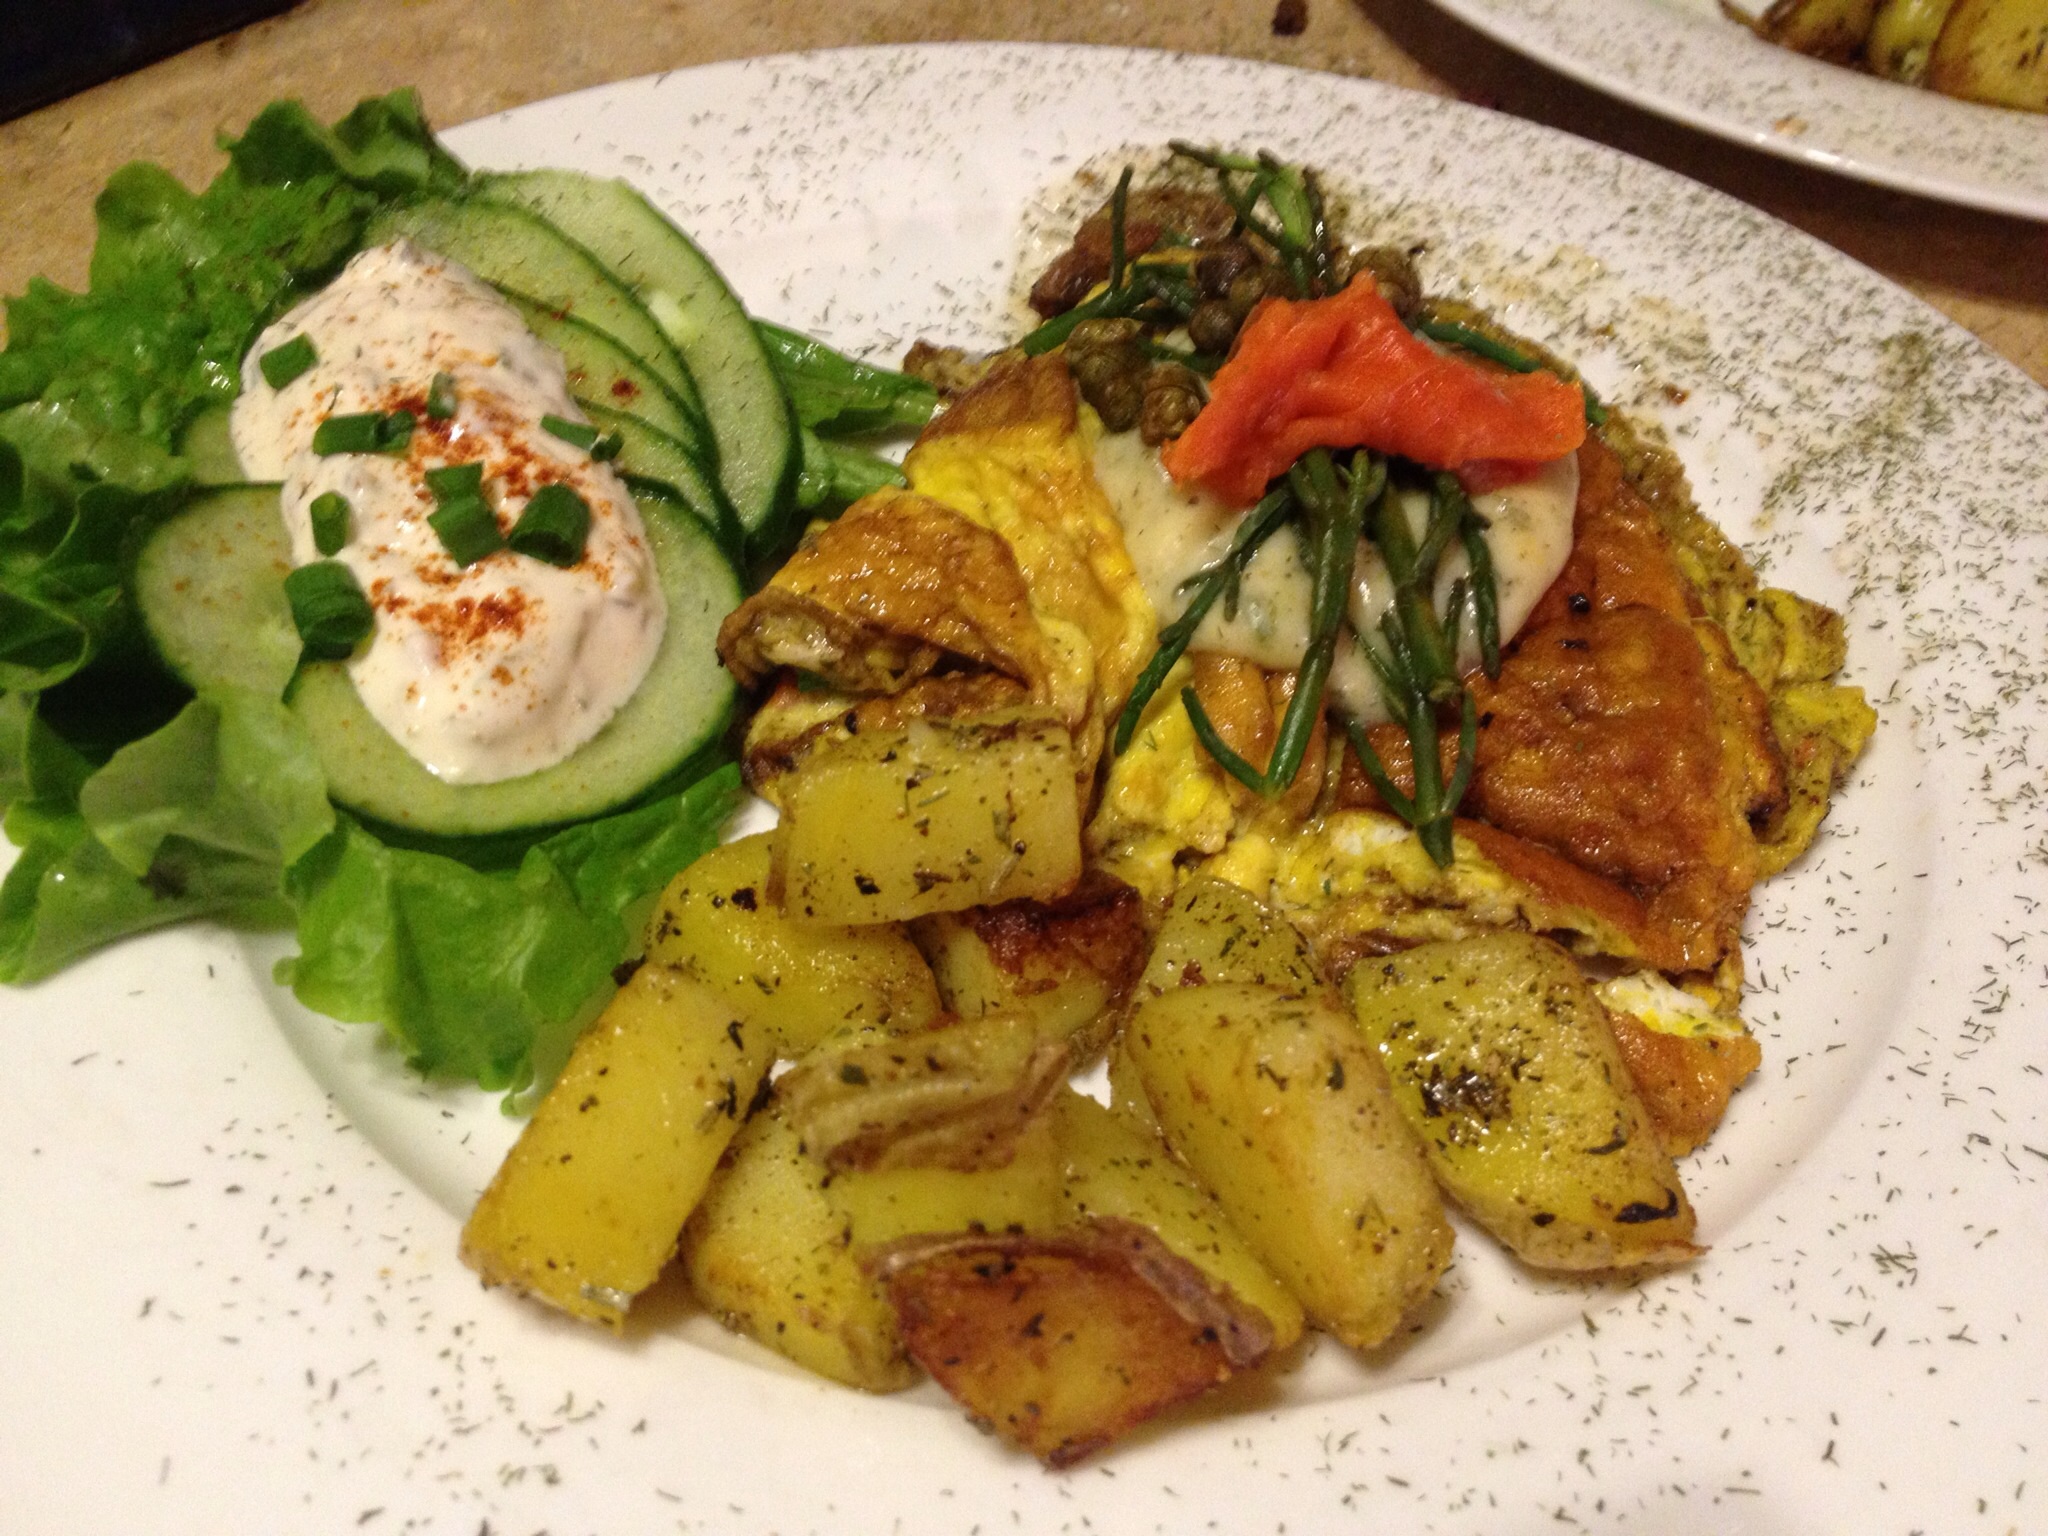 Lox omelette with Dill Béarnaise Sauce